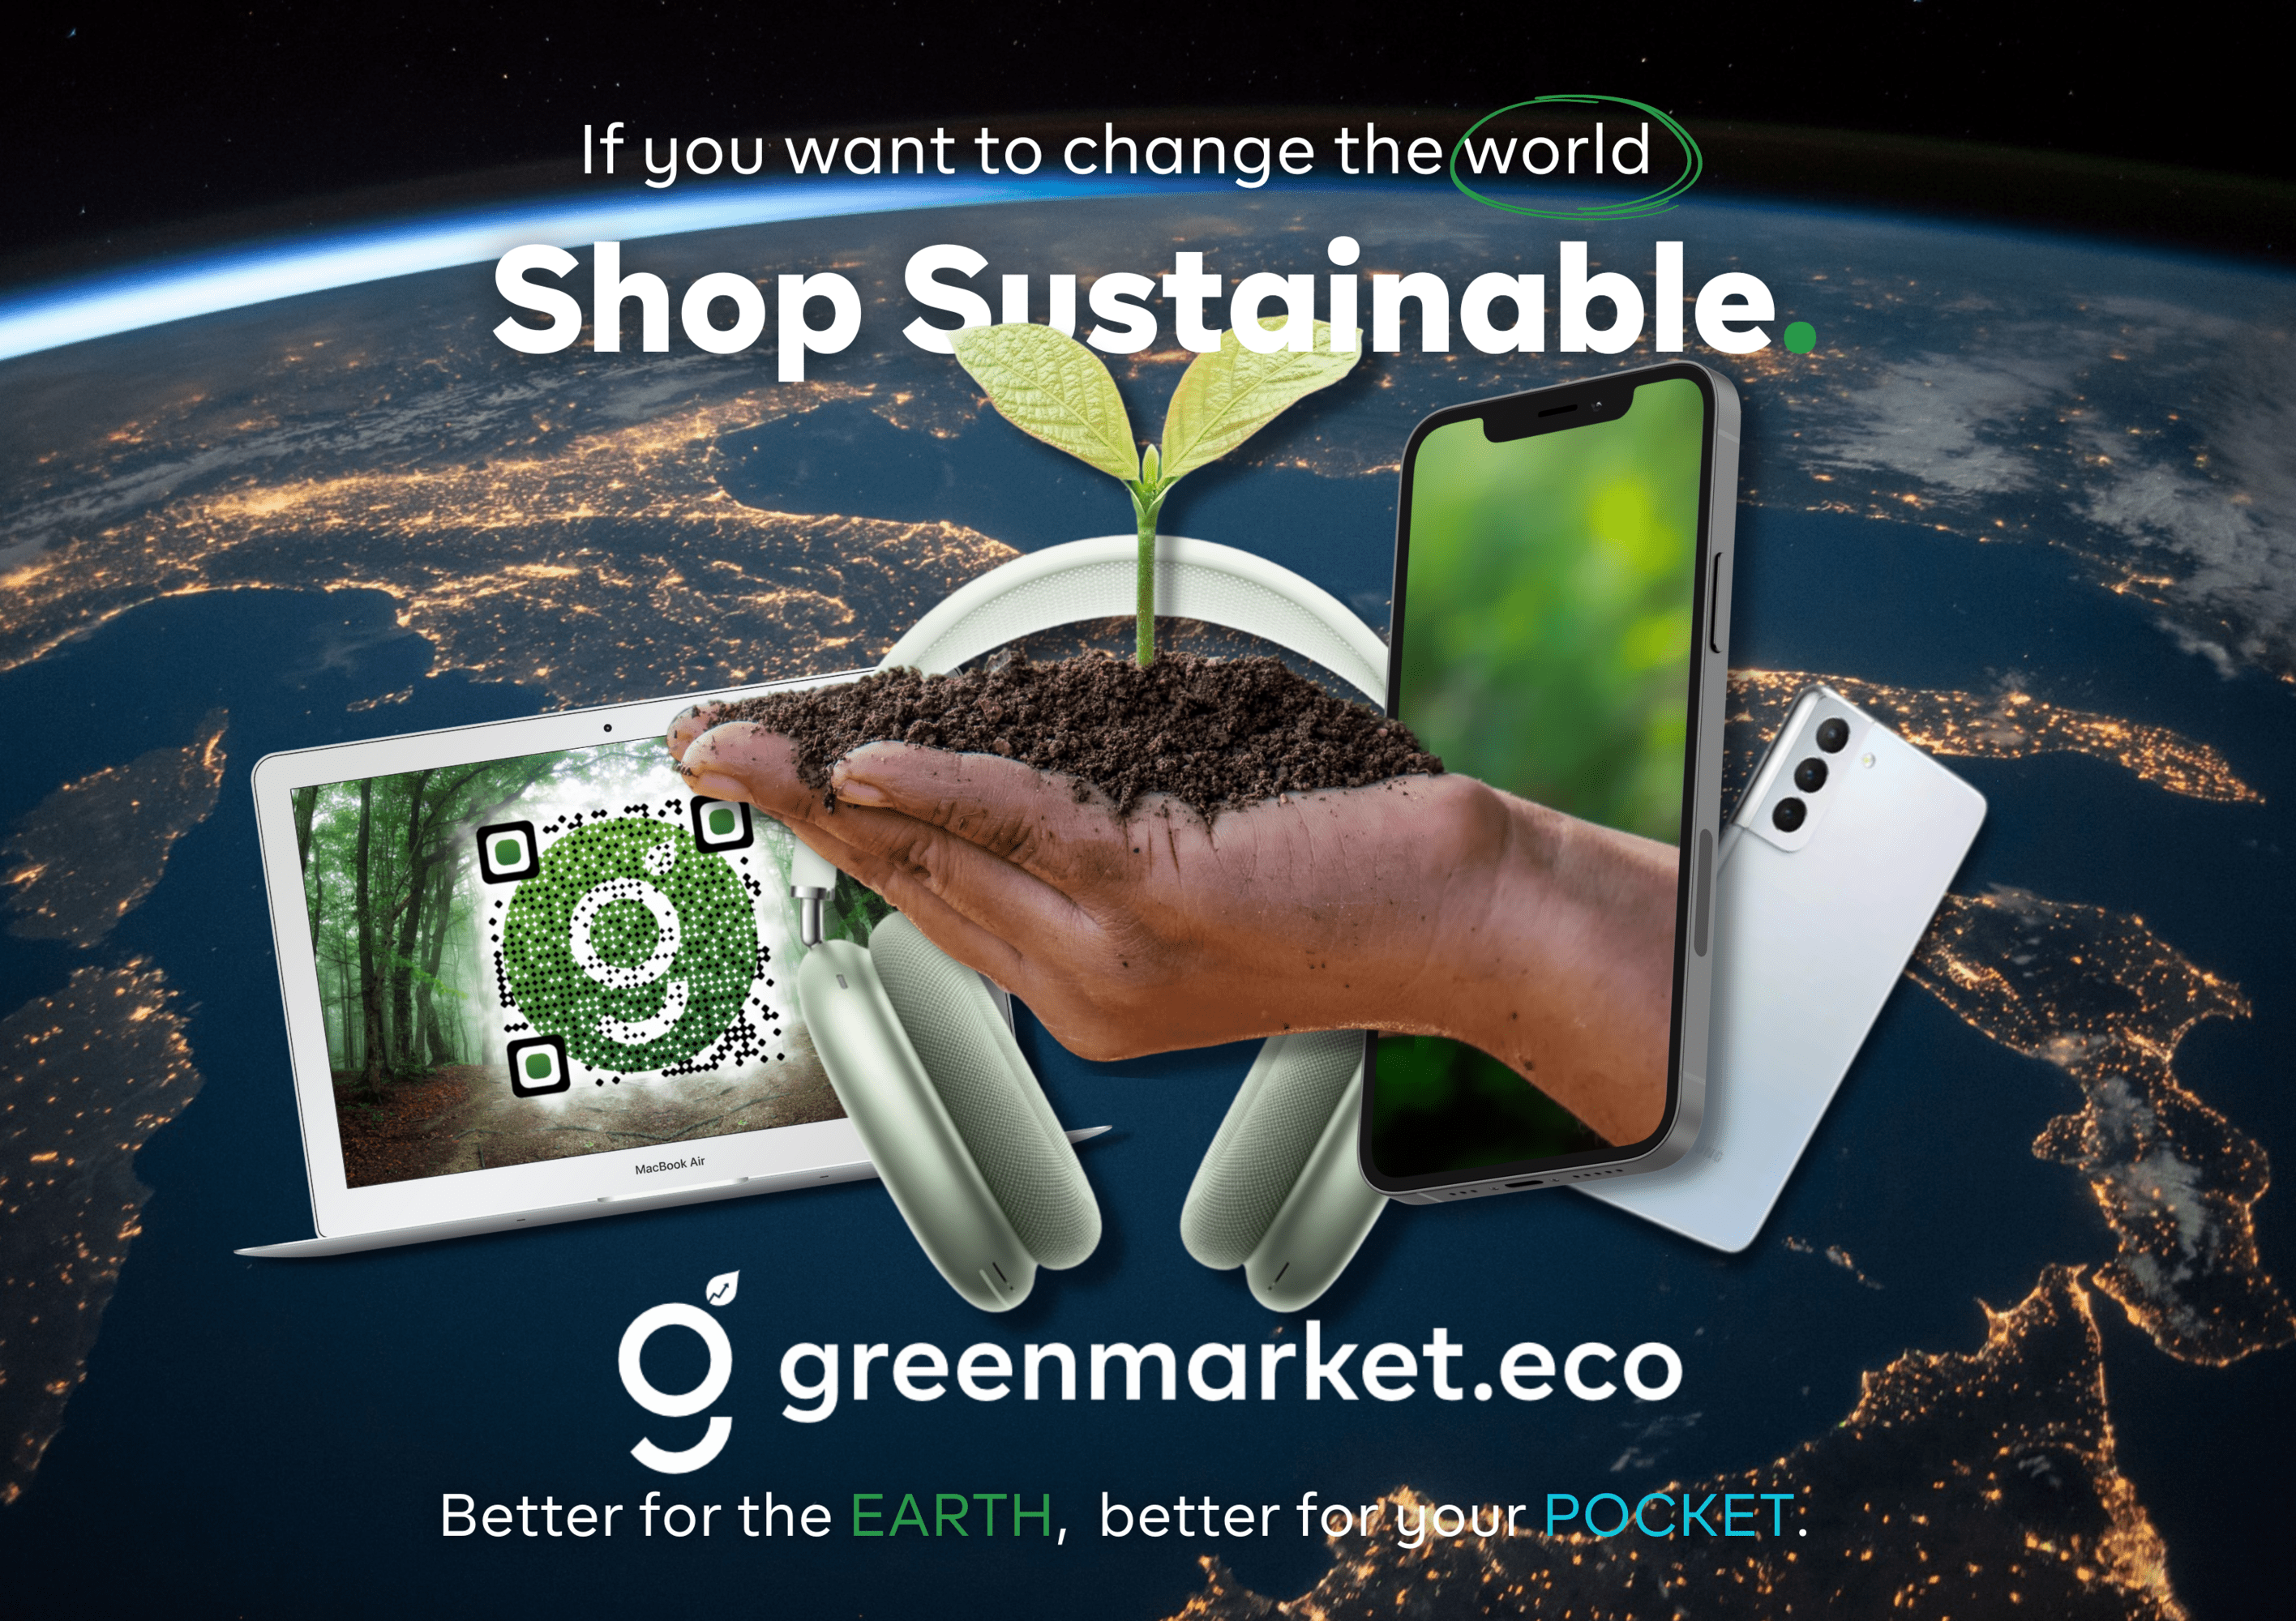 Greenmarket.eco – The World’s Marketplace for Sustainable Solutions